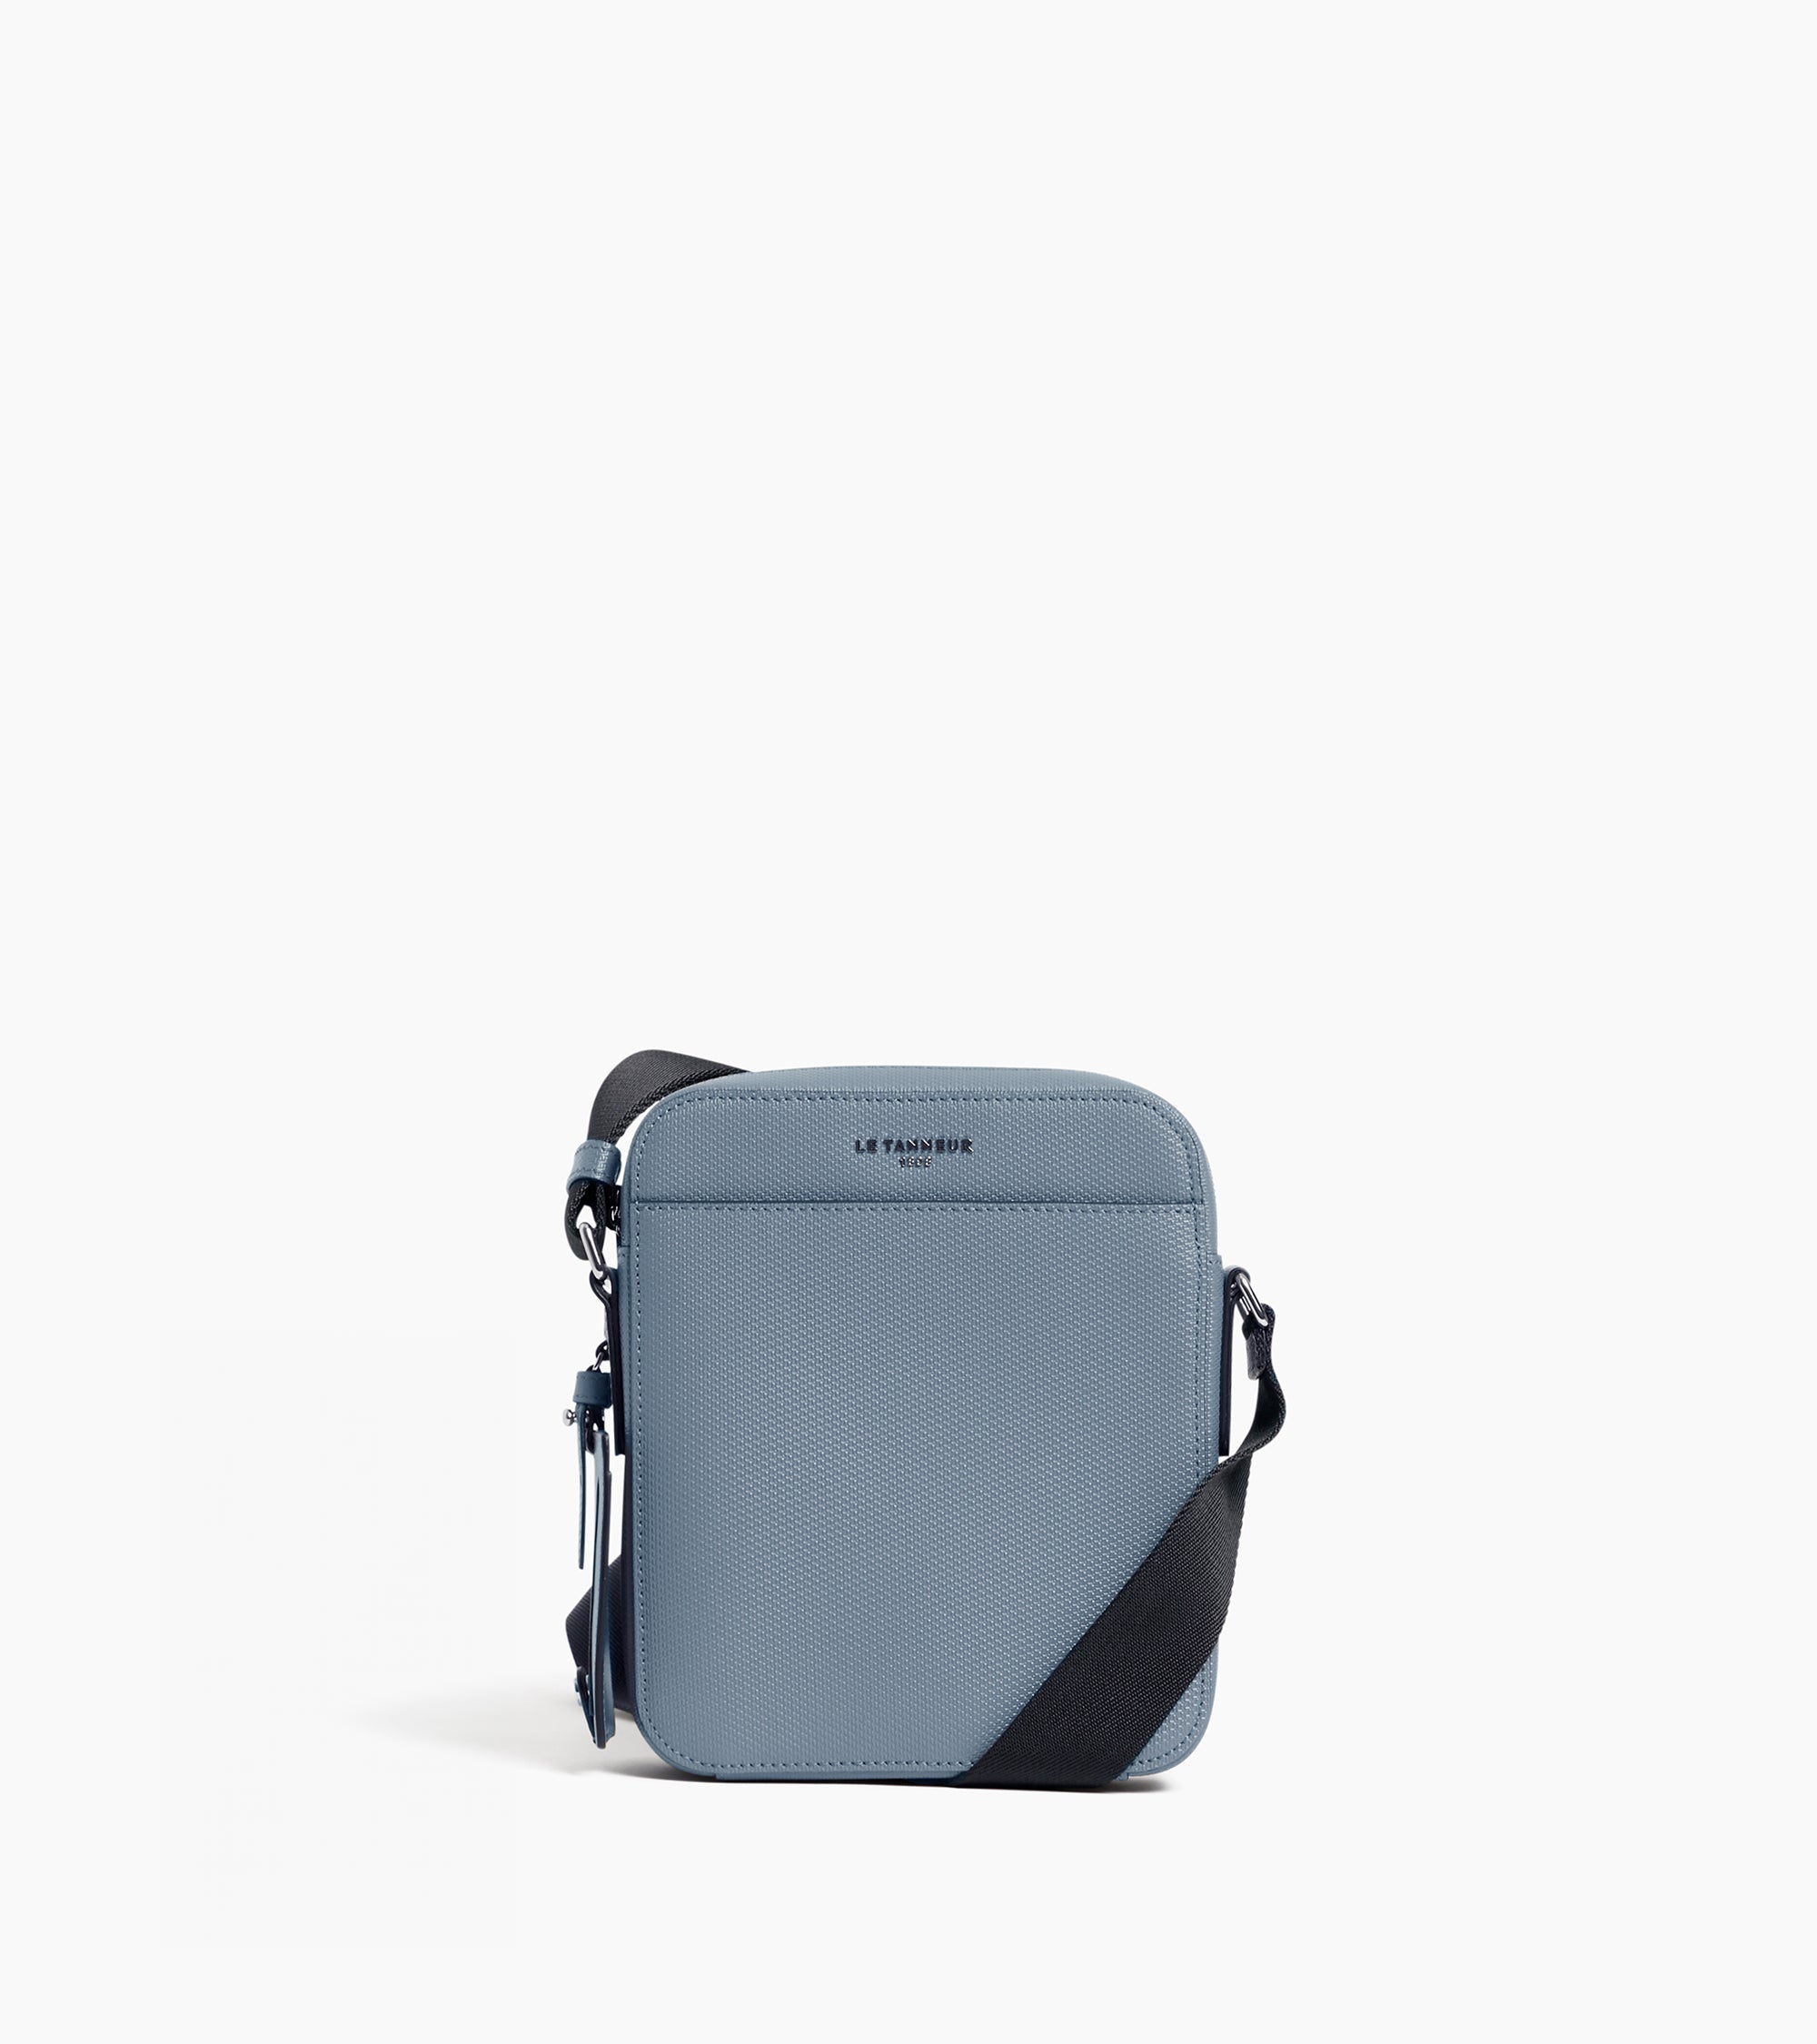 Emile small satchel in signature T leather